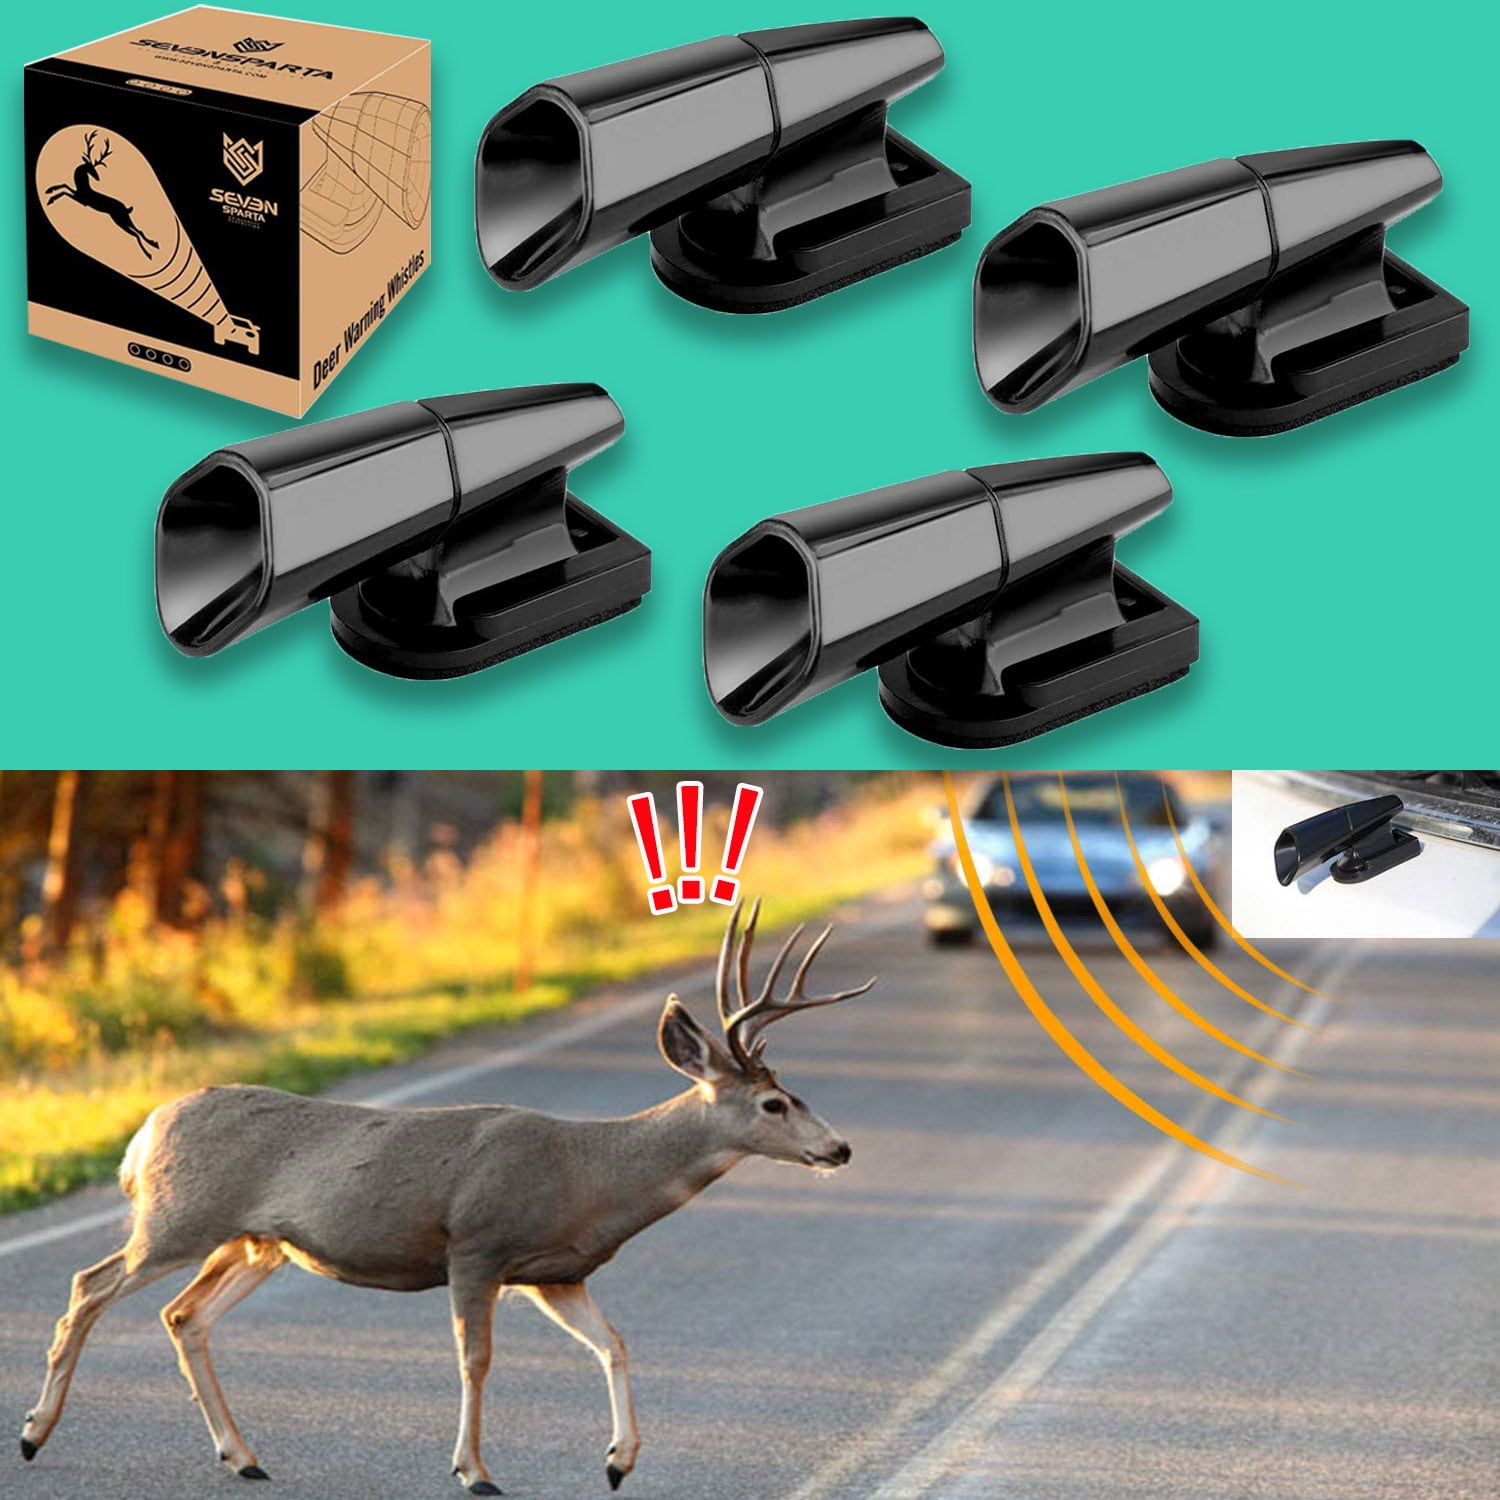 Dznils 4Pcs Car Deer Whistles Vehicle Wildlife Warning Device Animal Sonic  Alert Car Safety Accessory for Car SUV Vehicle Truck Motorcycle